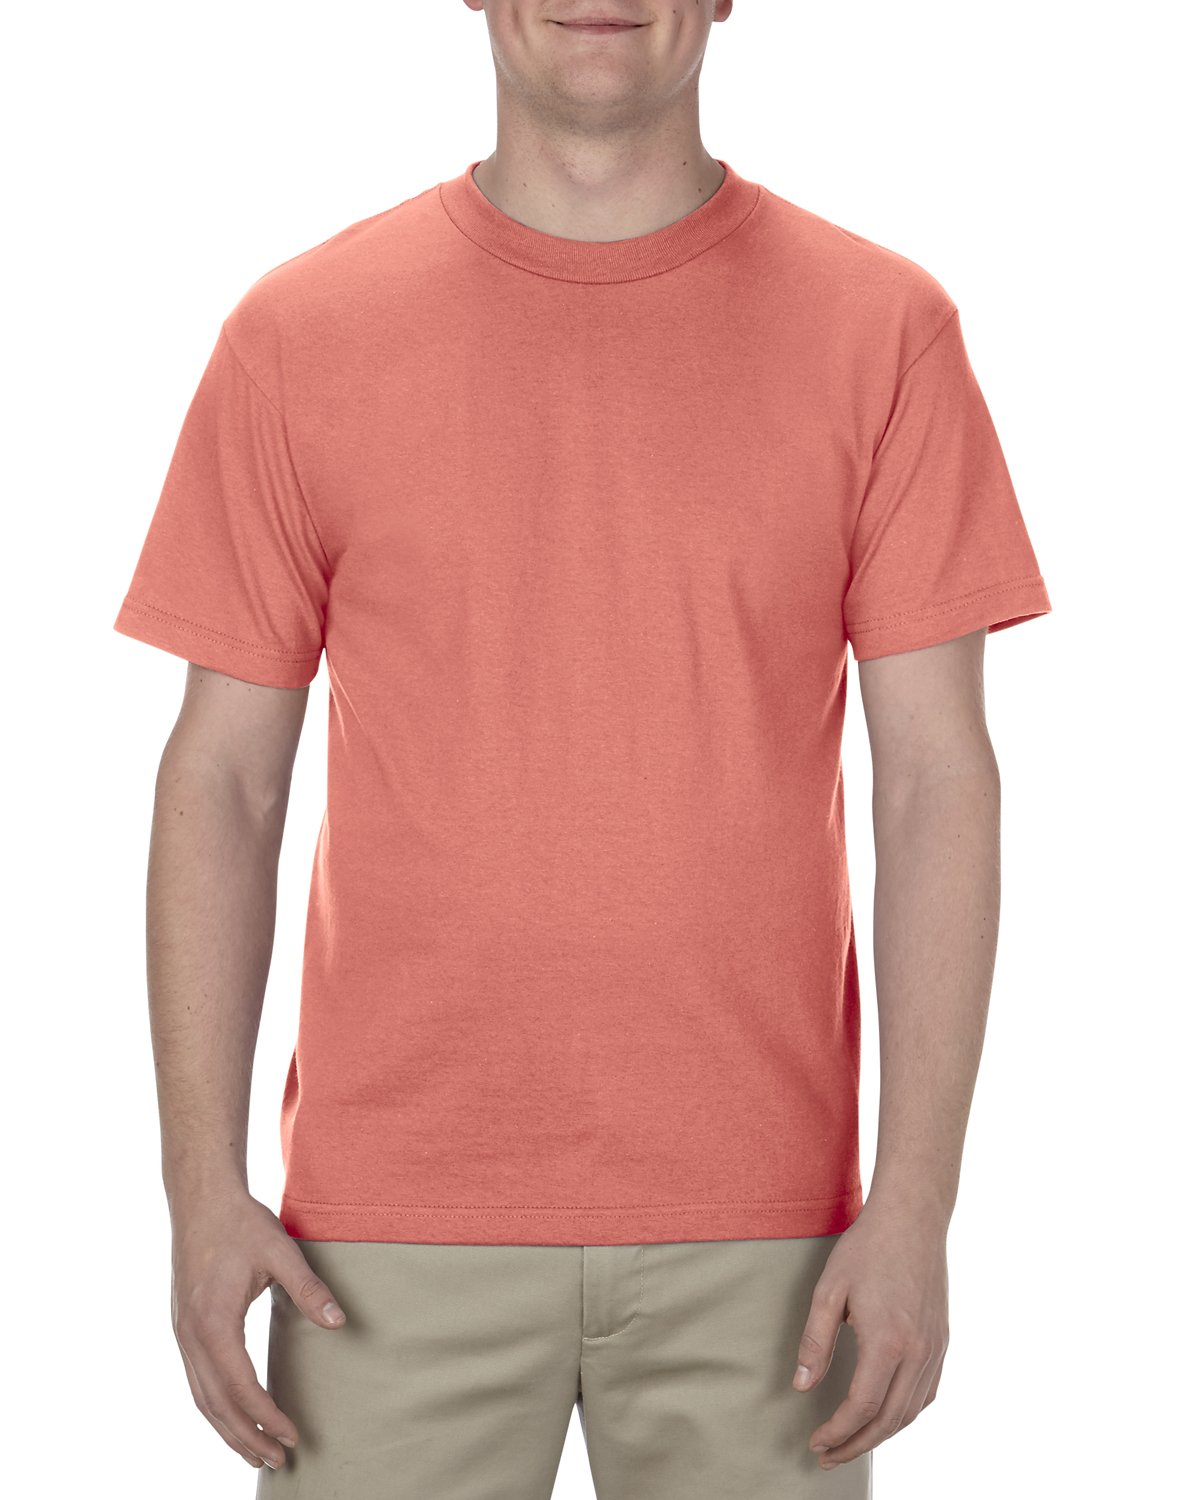 coral red t shirt